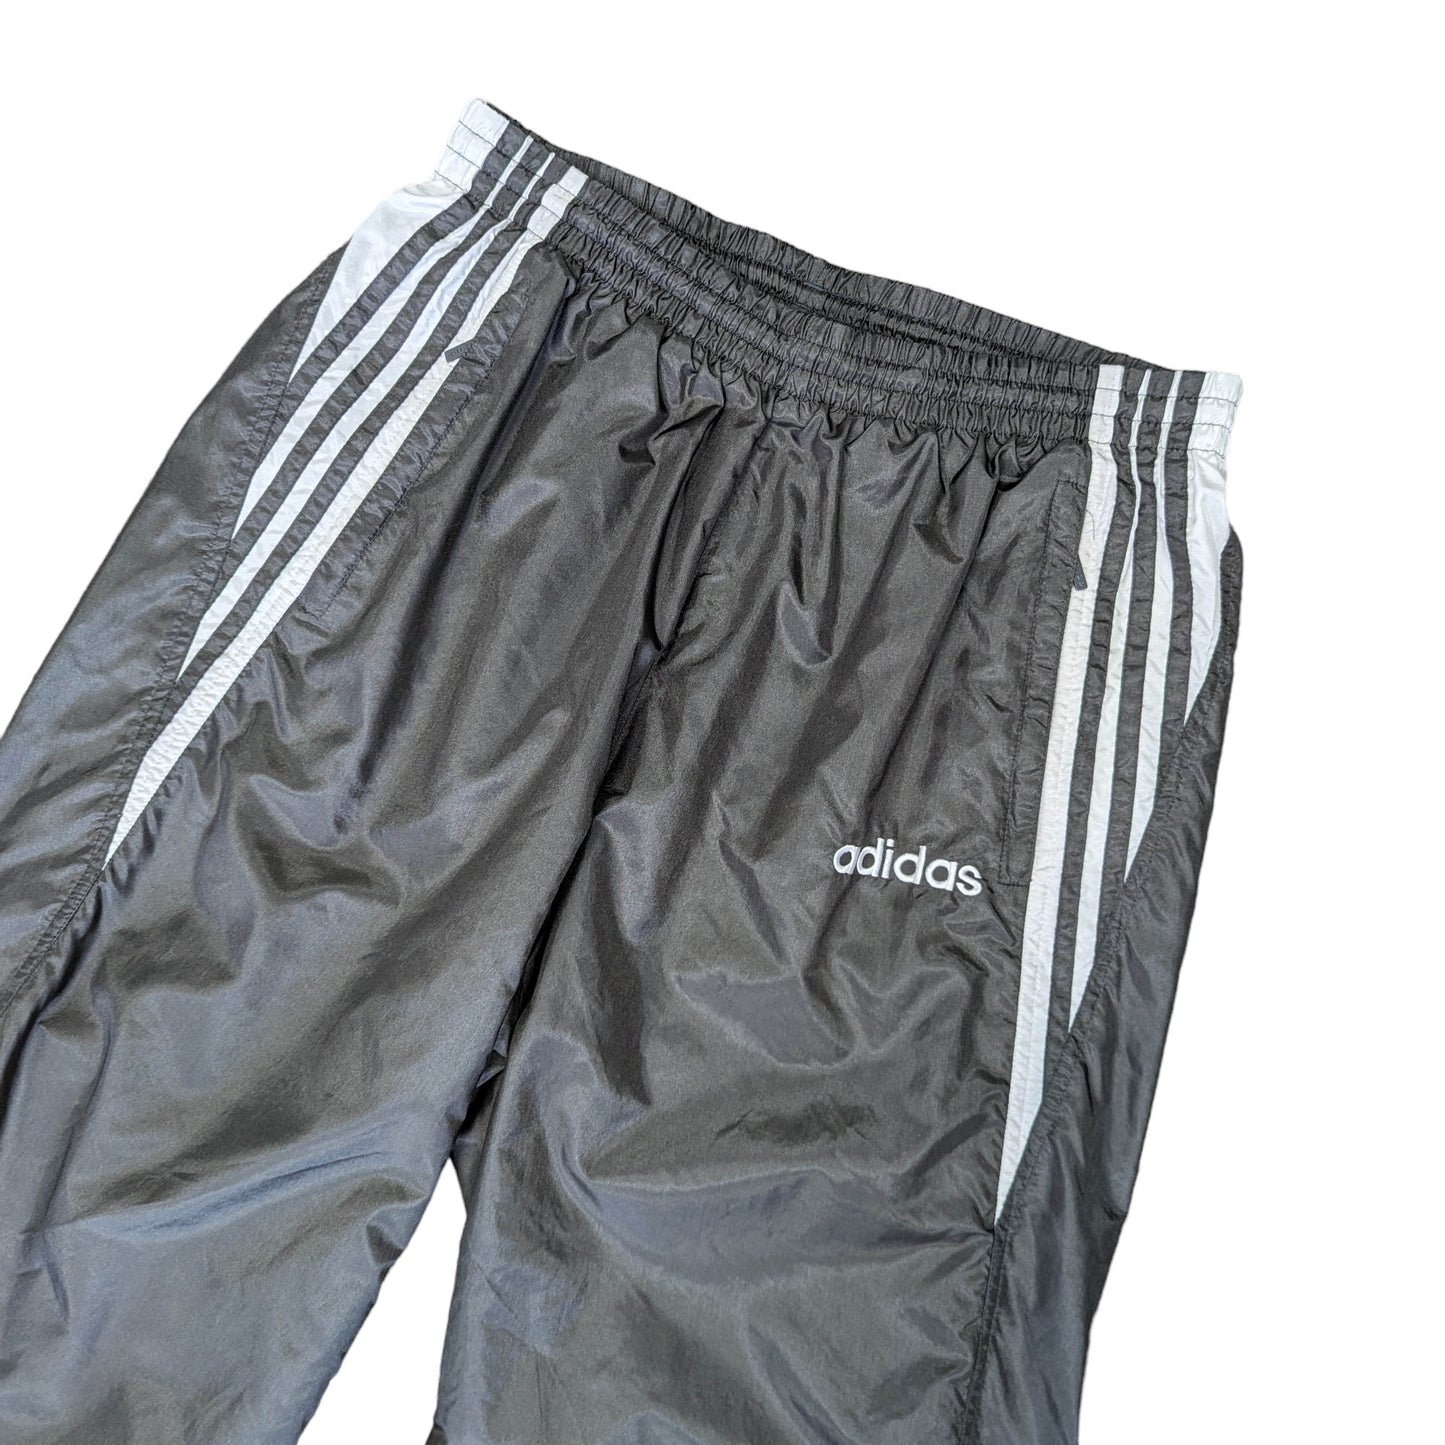 90s Adidas Joggers Size L